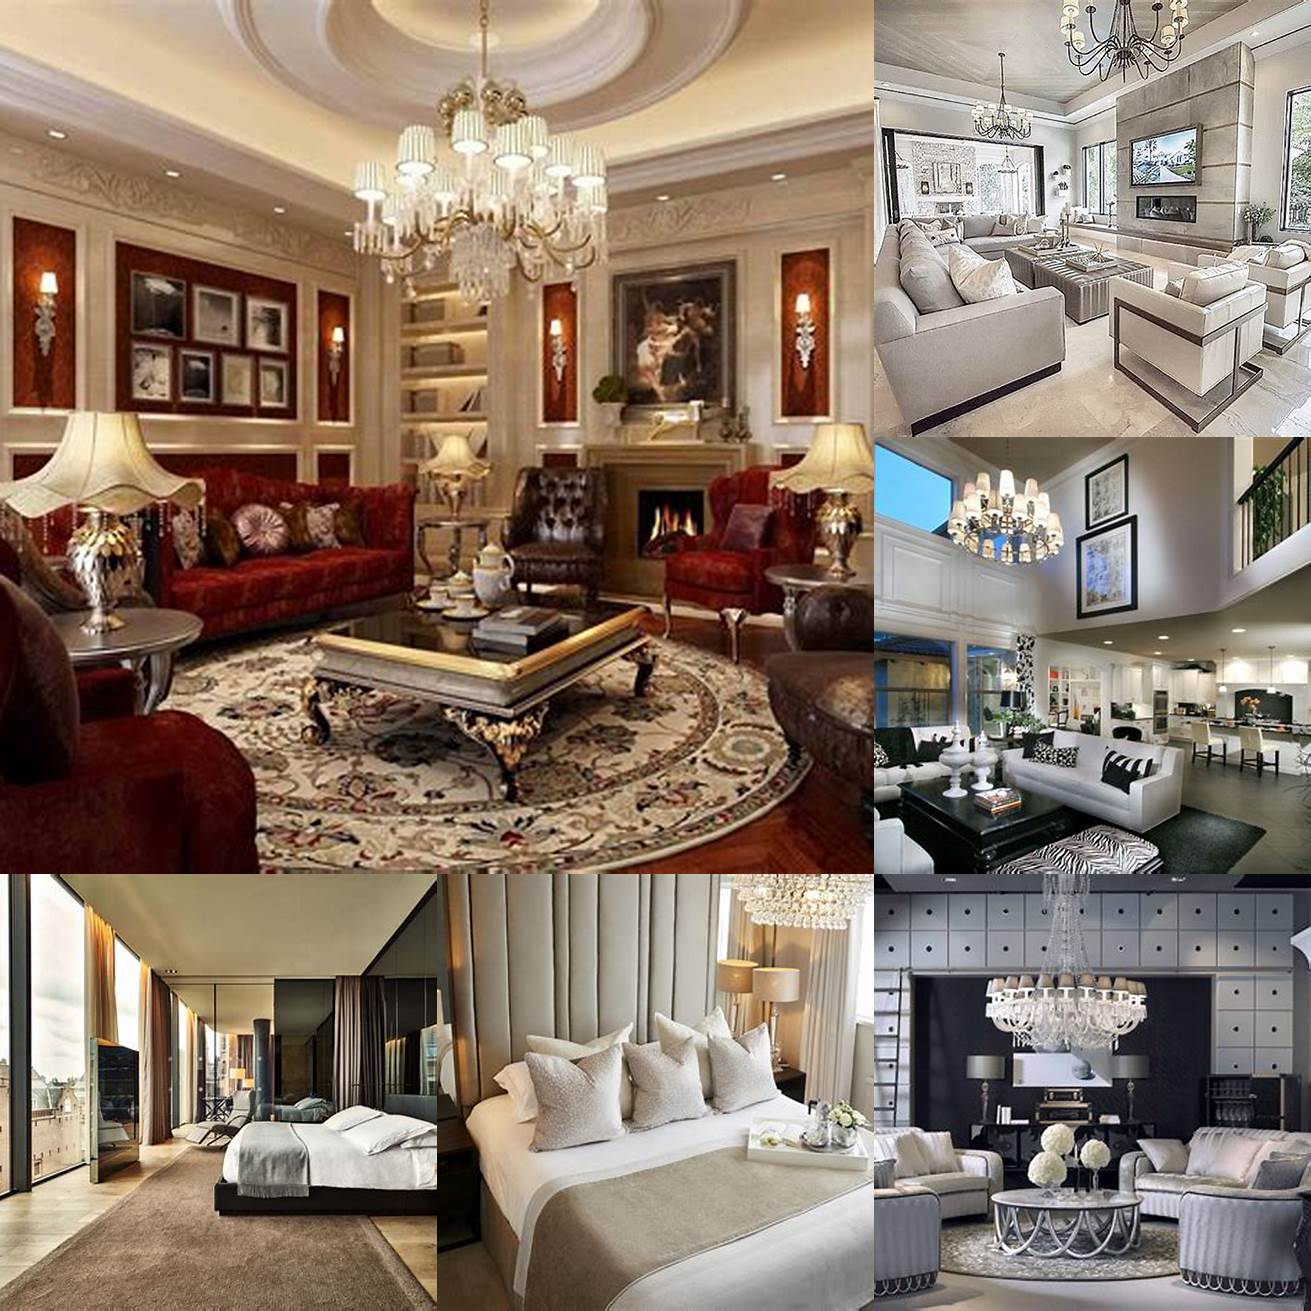 A room with a luxurious feel